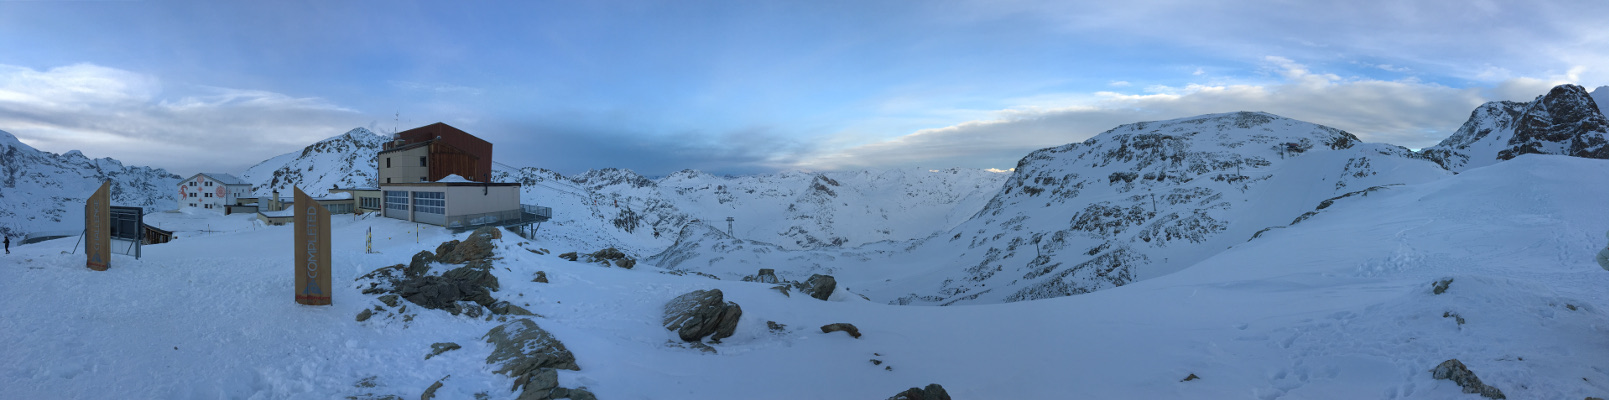 Panorama picture of the Diavolezza mountain station.